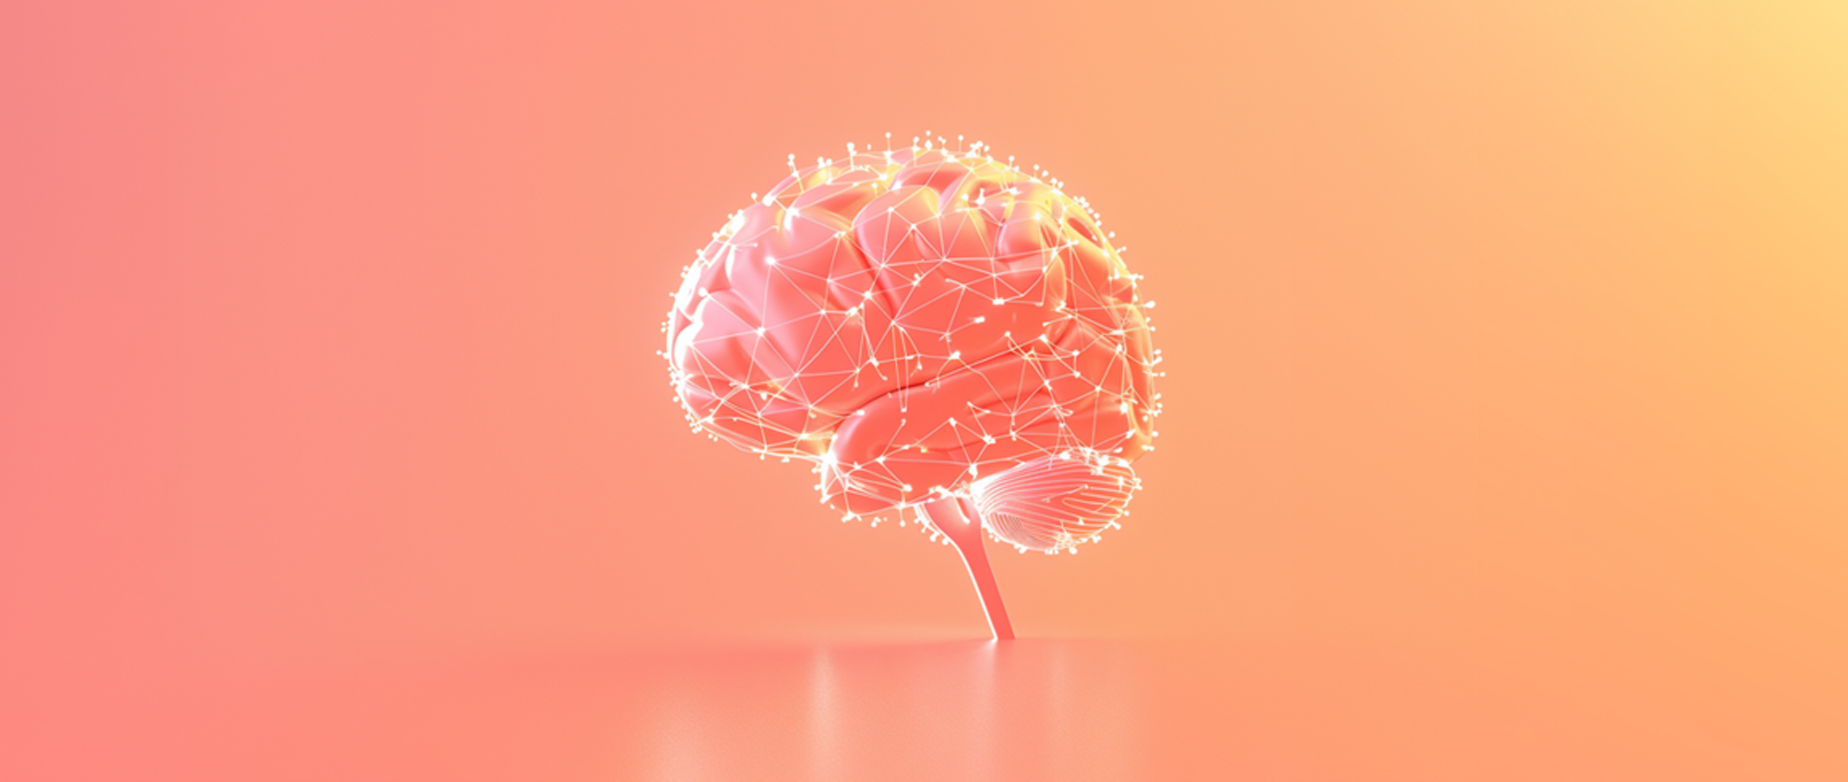 A brain with lit up neuro-pathways on a peach background.